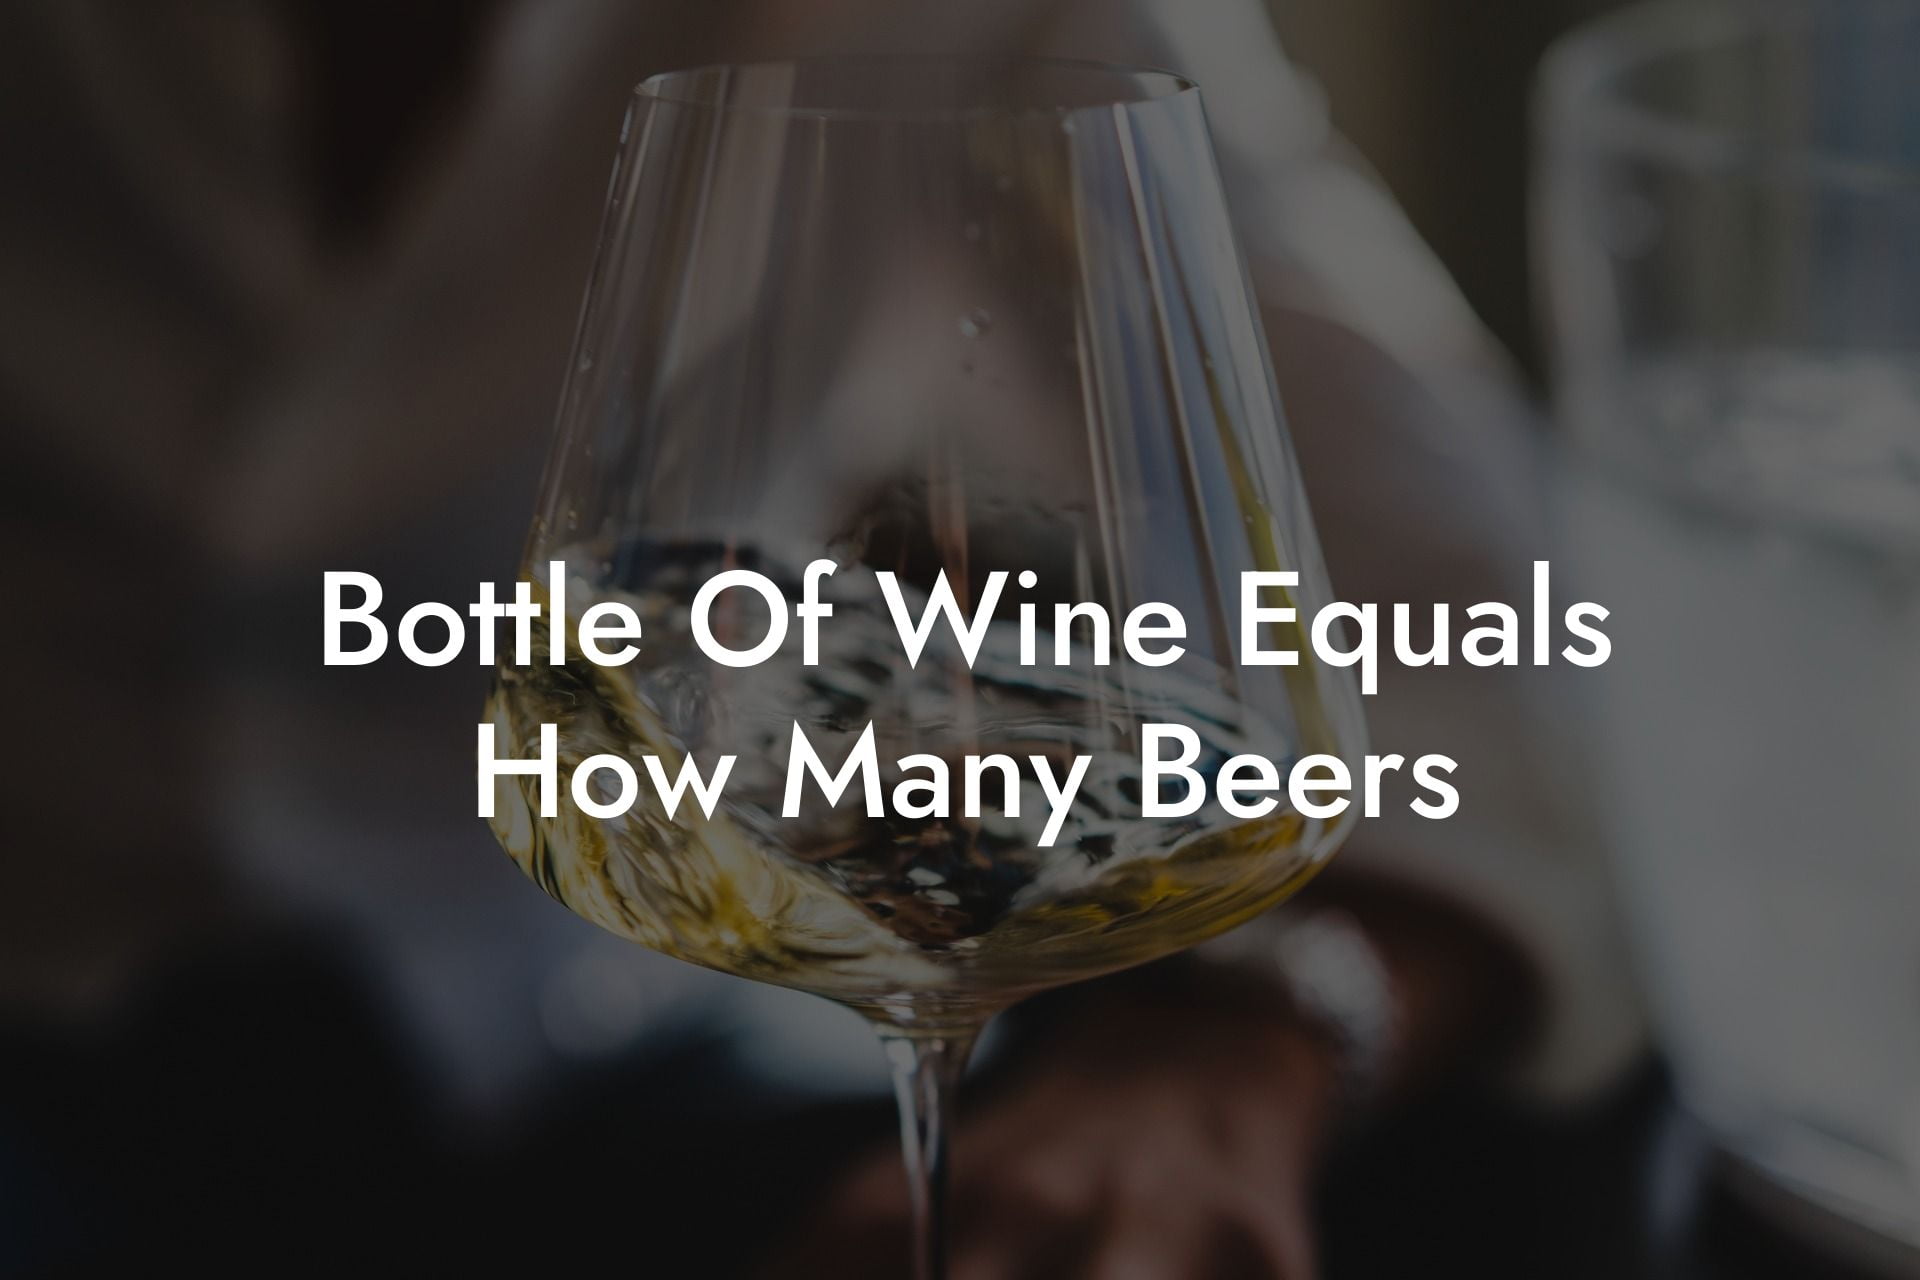 Bottle Of Wine Equals How Many Beers